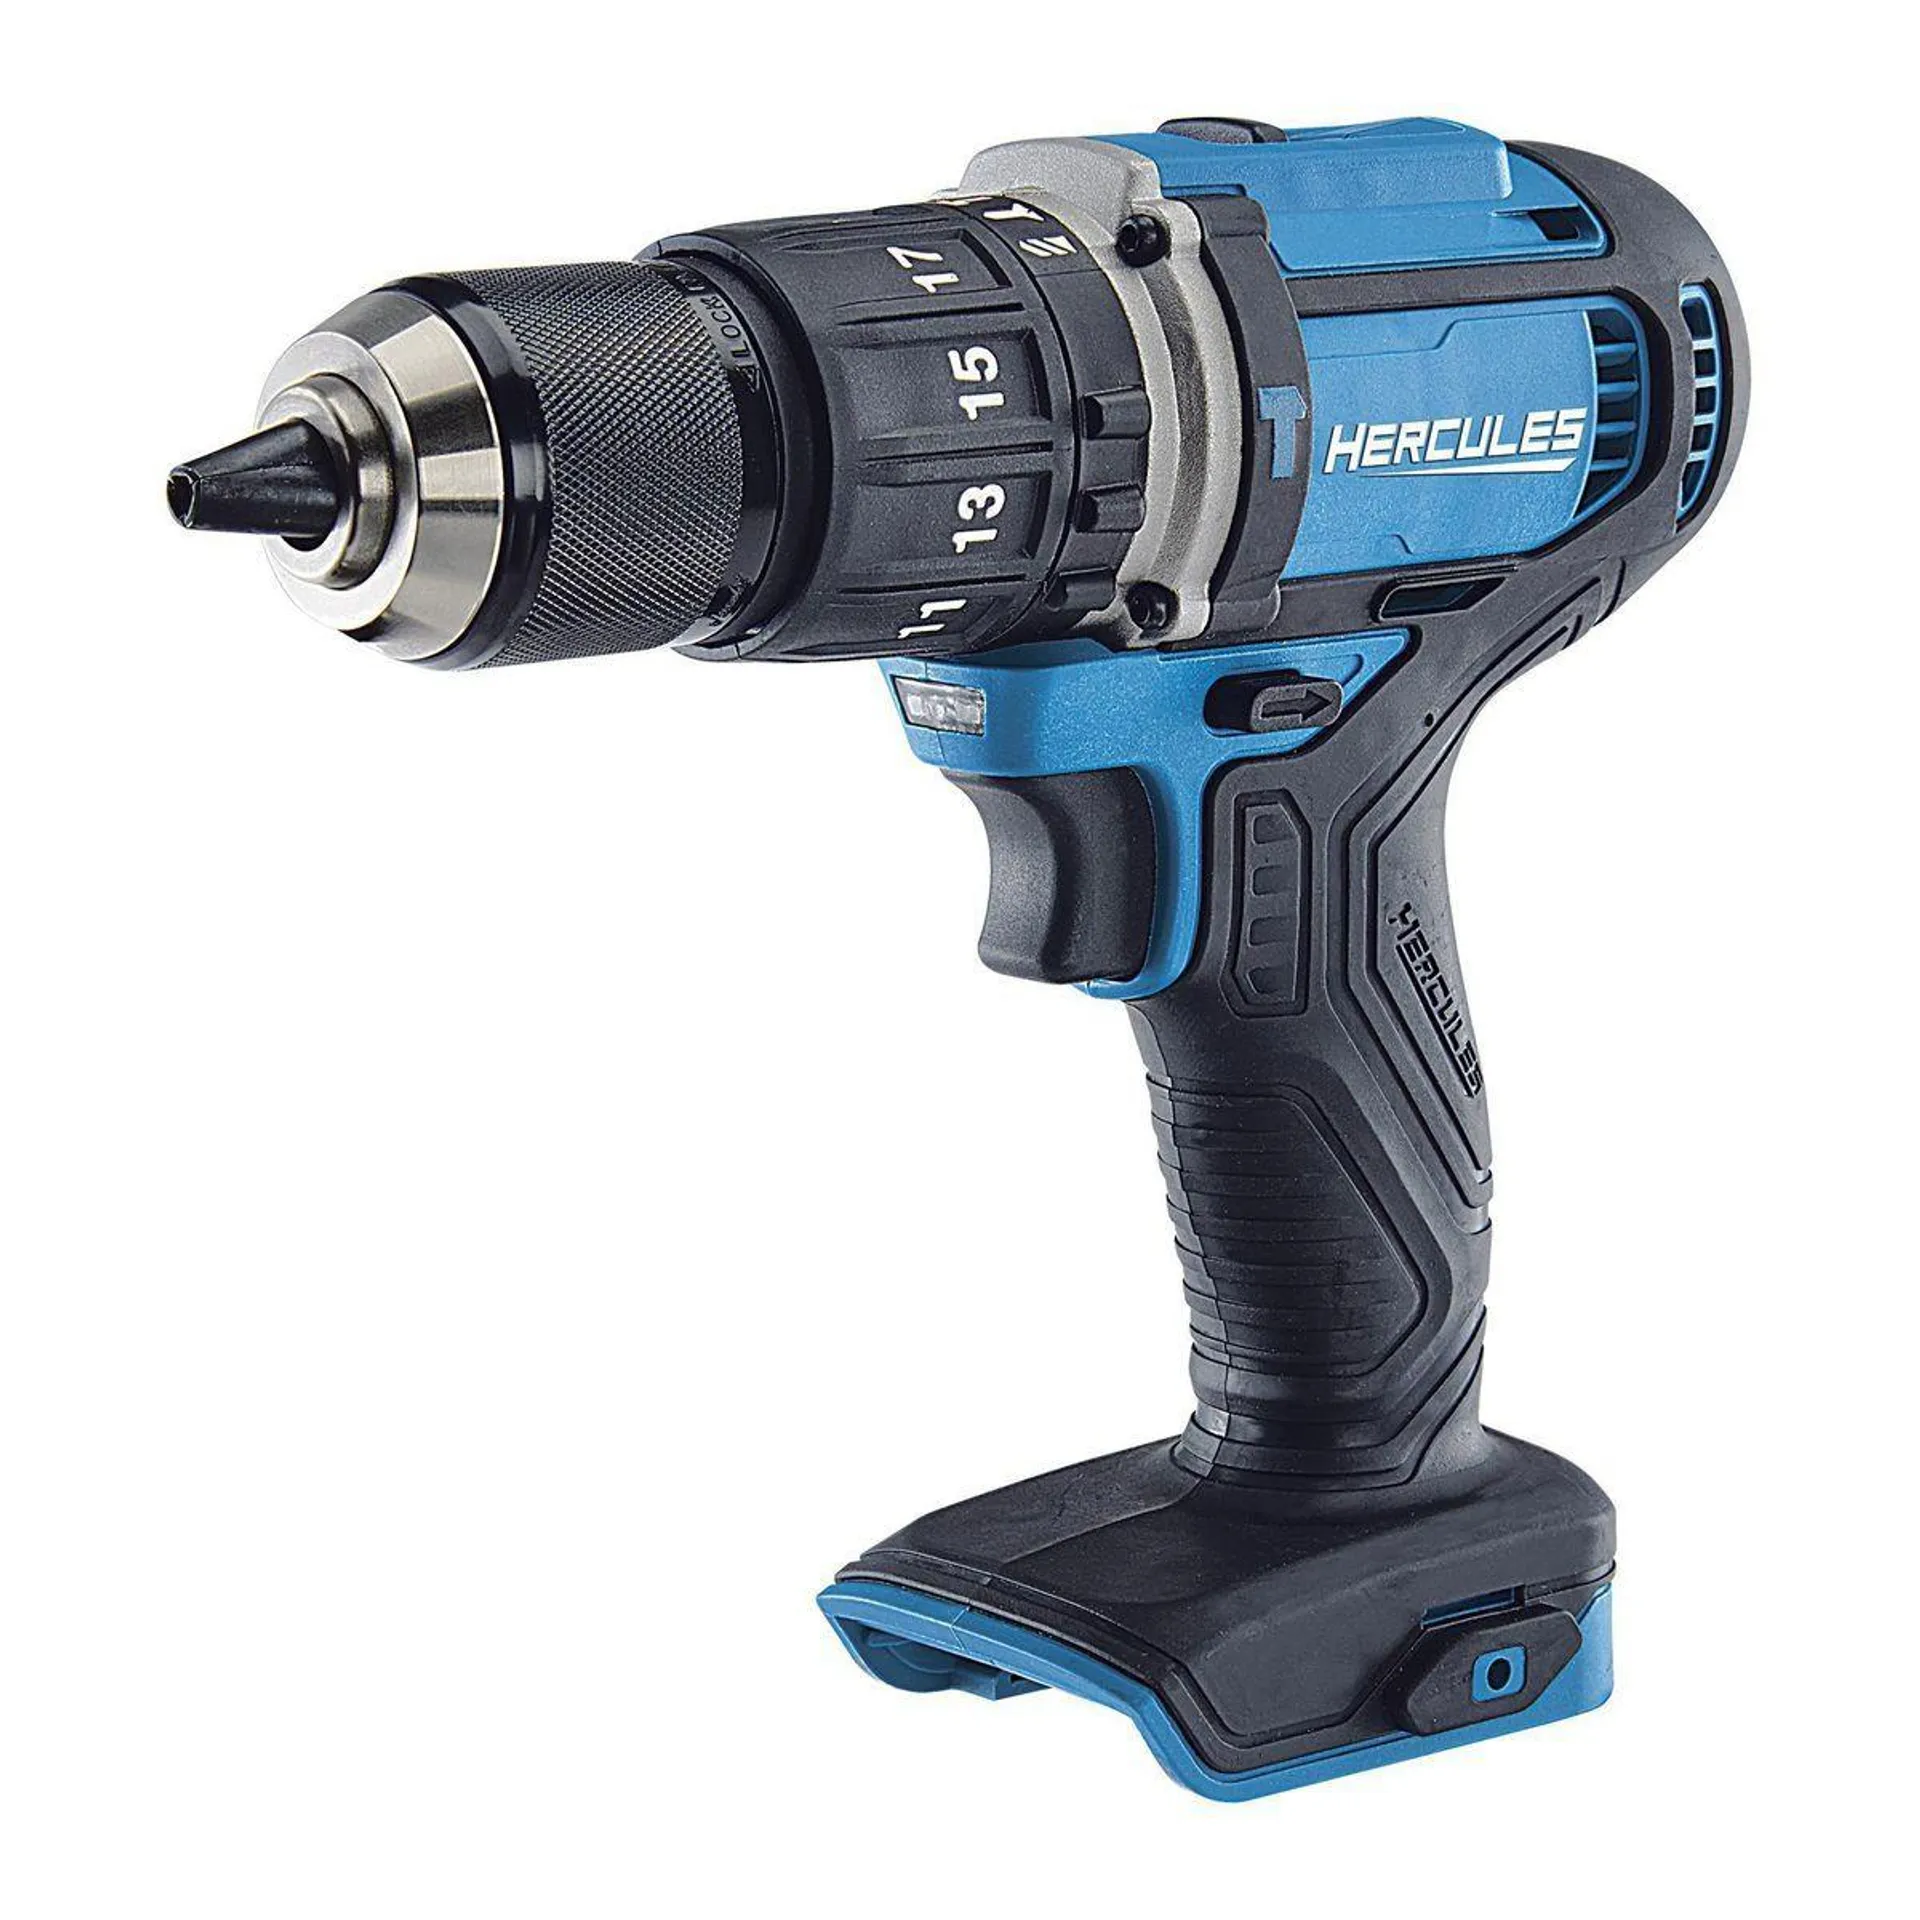 20V Cordless 1/2 in. Compact Variable Speed Hammer Drill/Driver - Tool Only